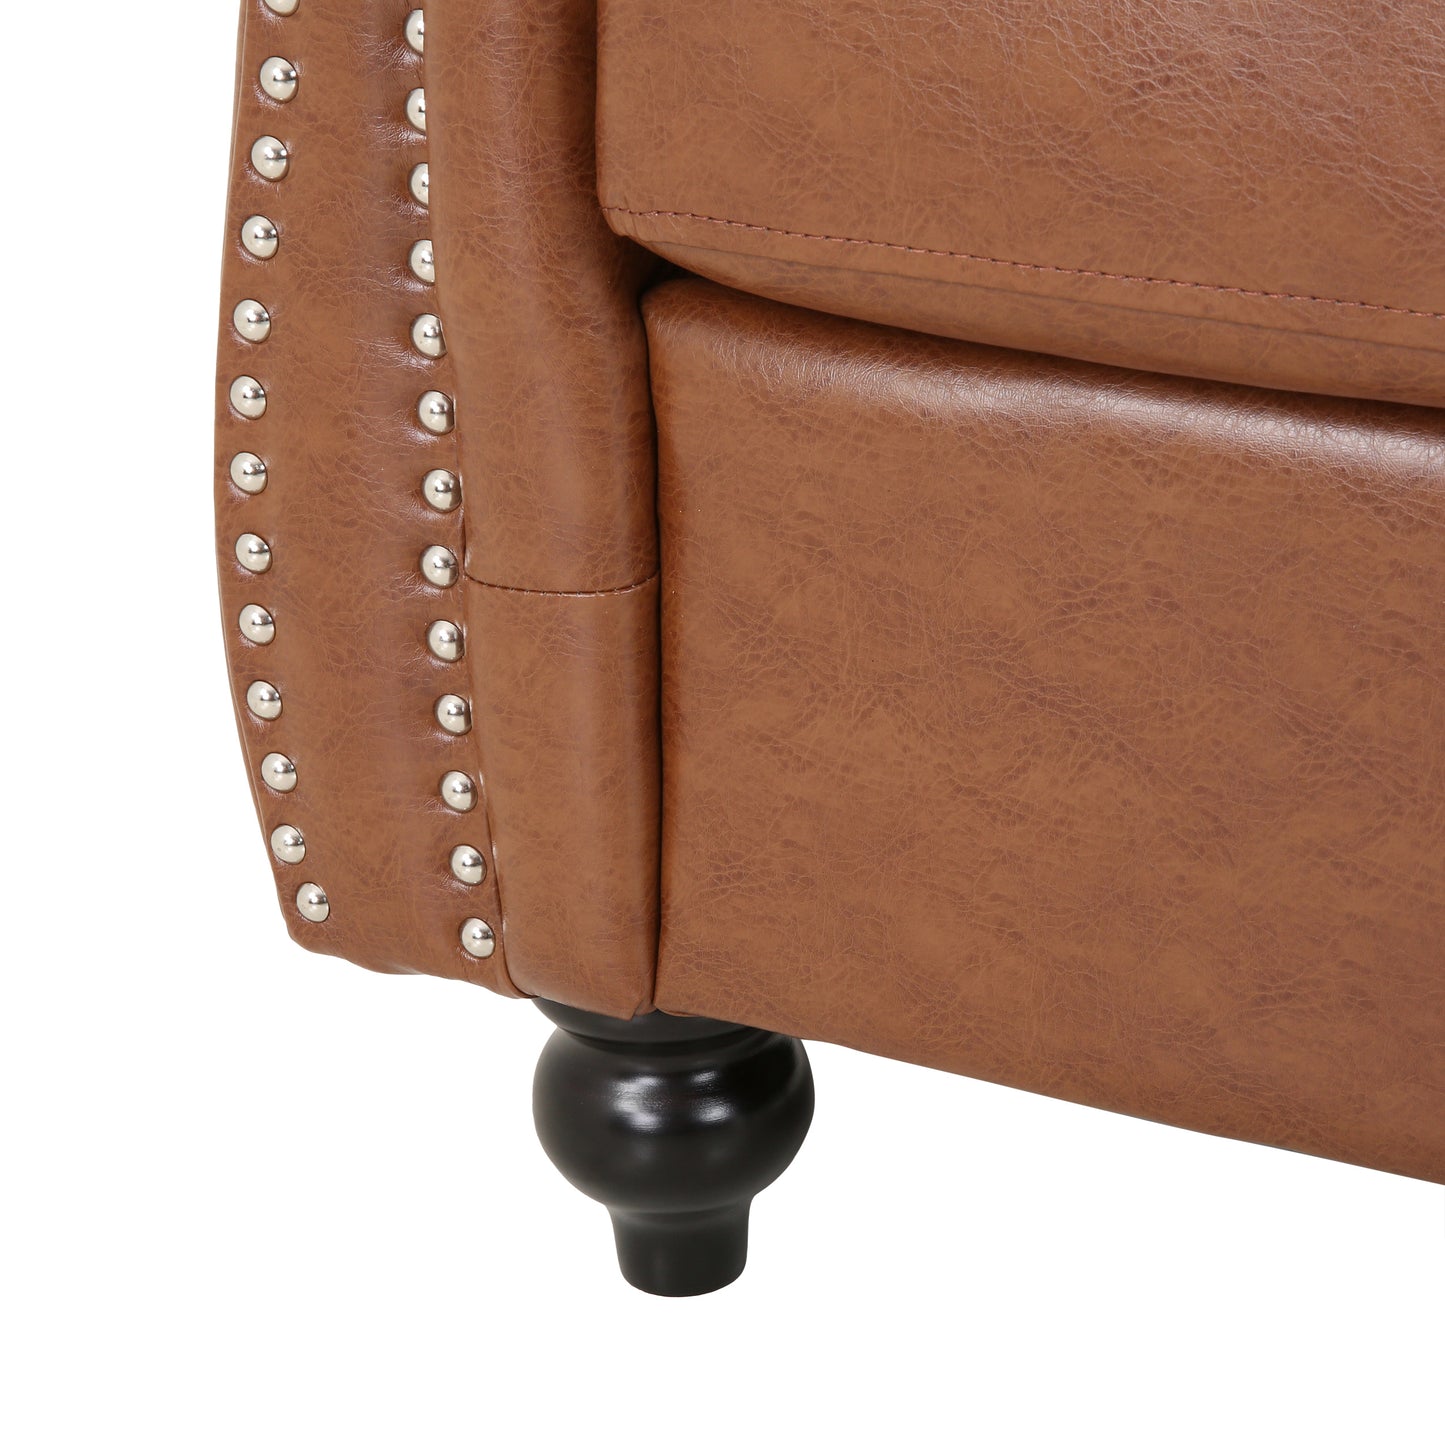 Madelena Traditional Chesterfield Club Chair